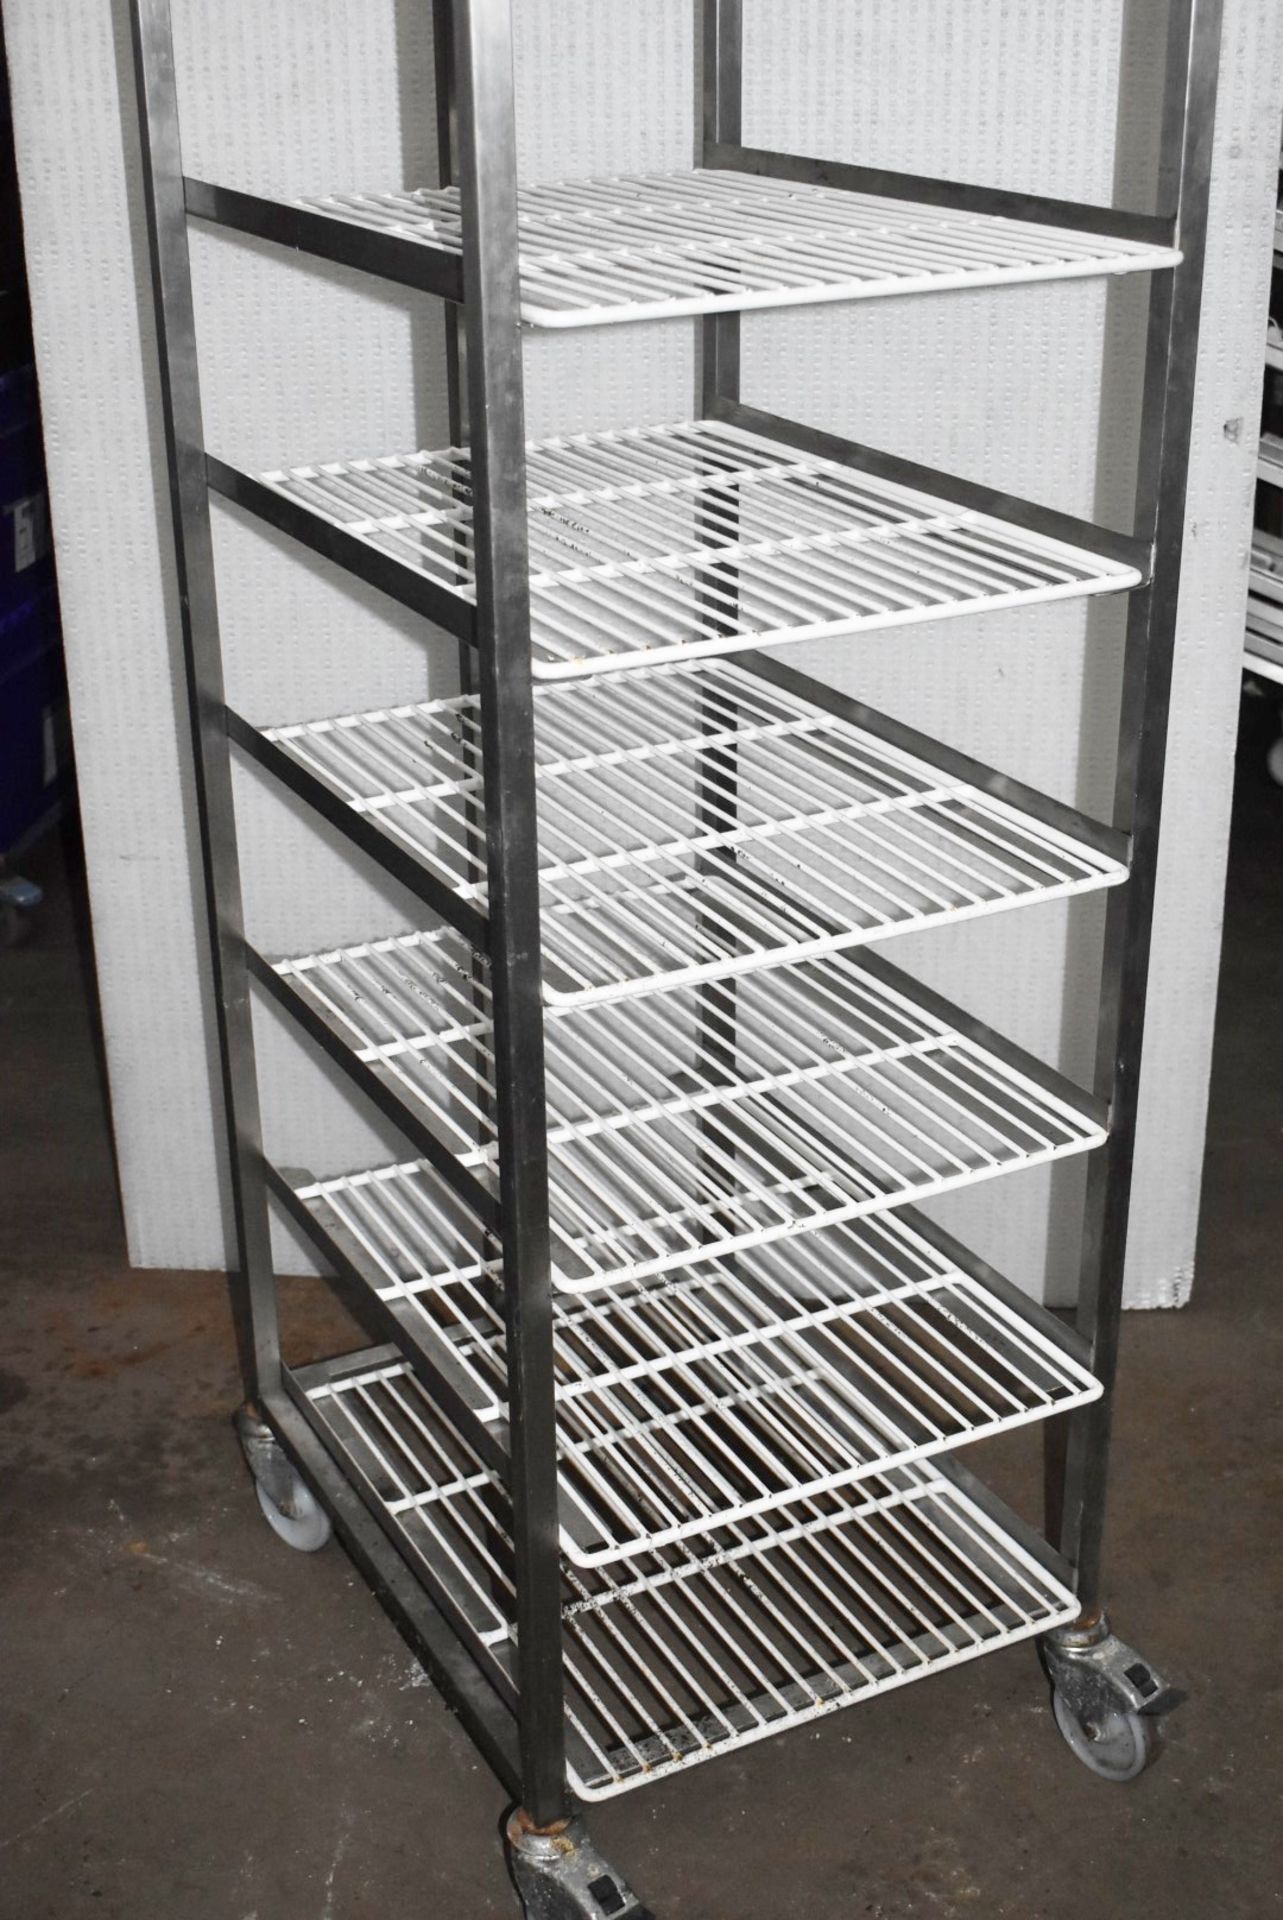 1 x Upright Stainless Steel Mobile Tray Rack With 8 Shelves - Shelf Size: 47 x 63 cms - CL675 - Ref: - Image 5 of 5